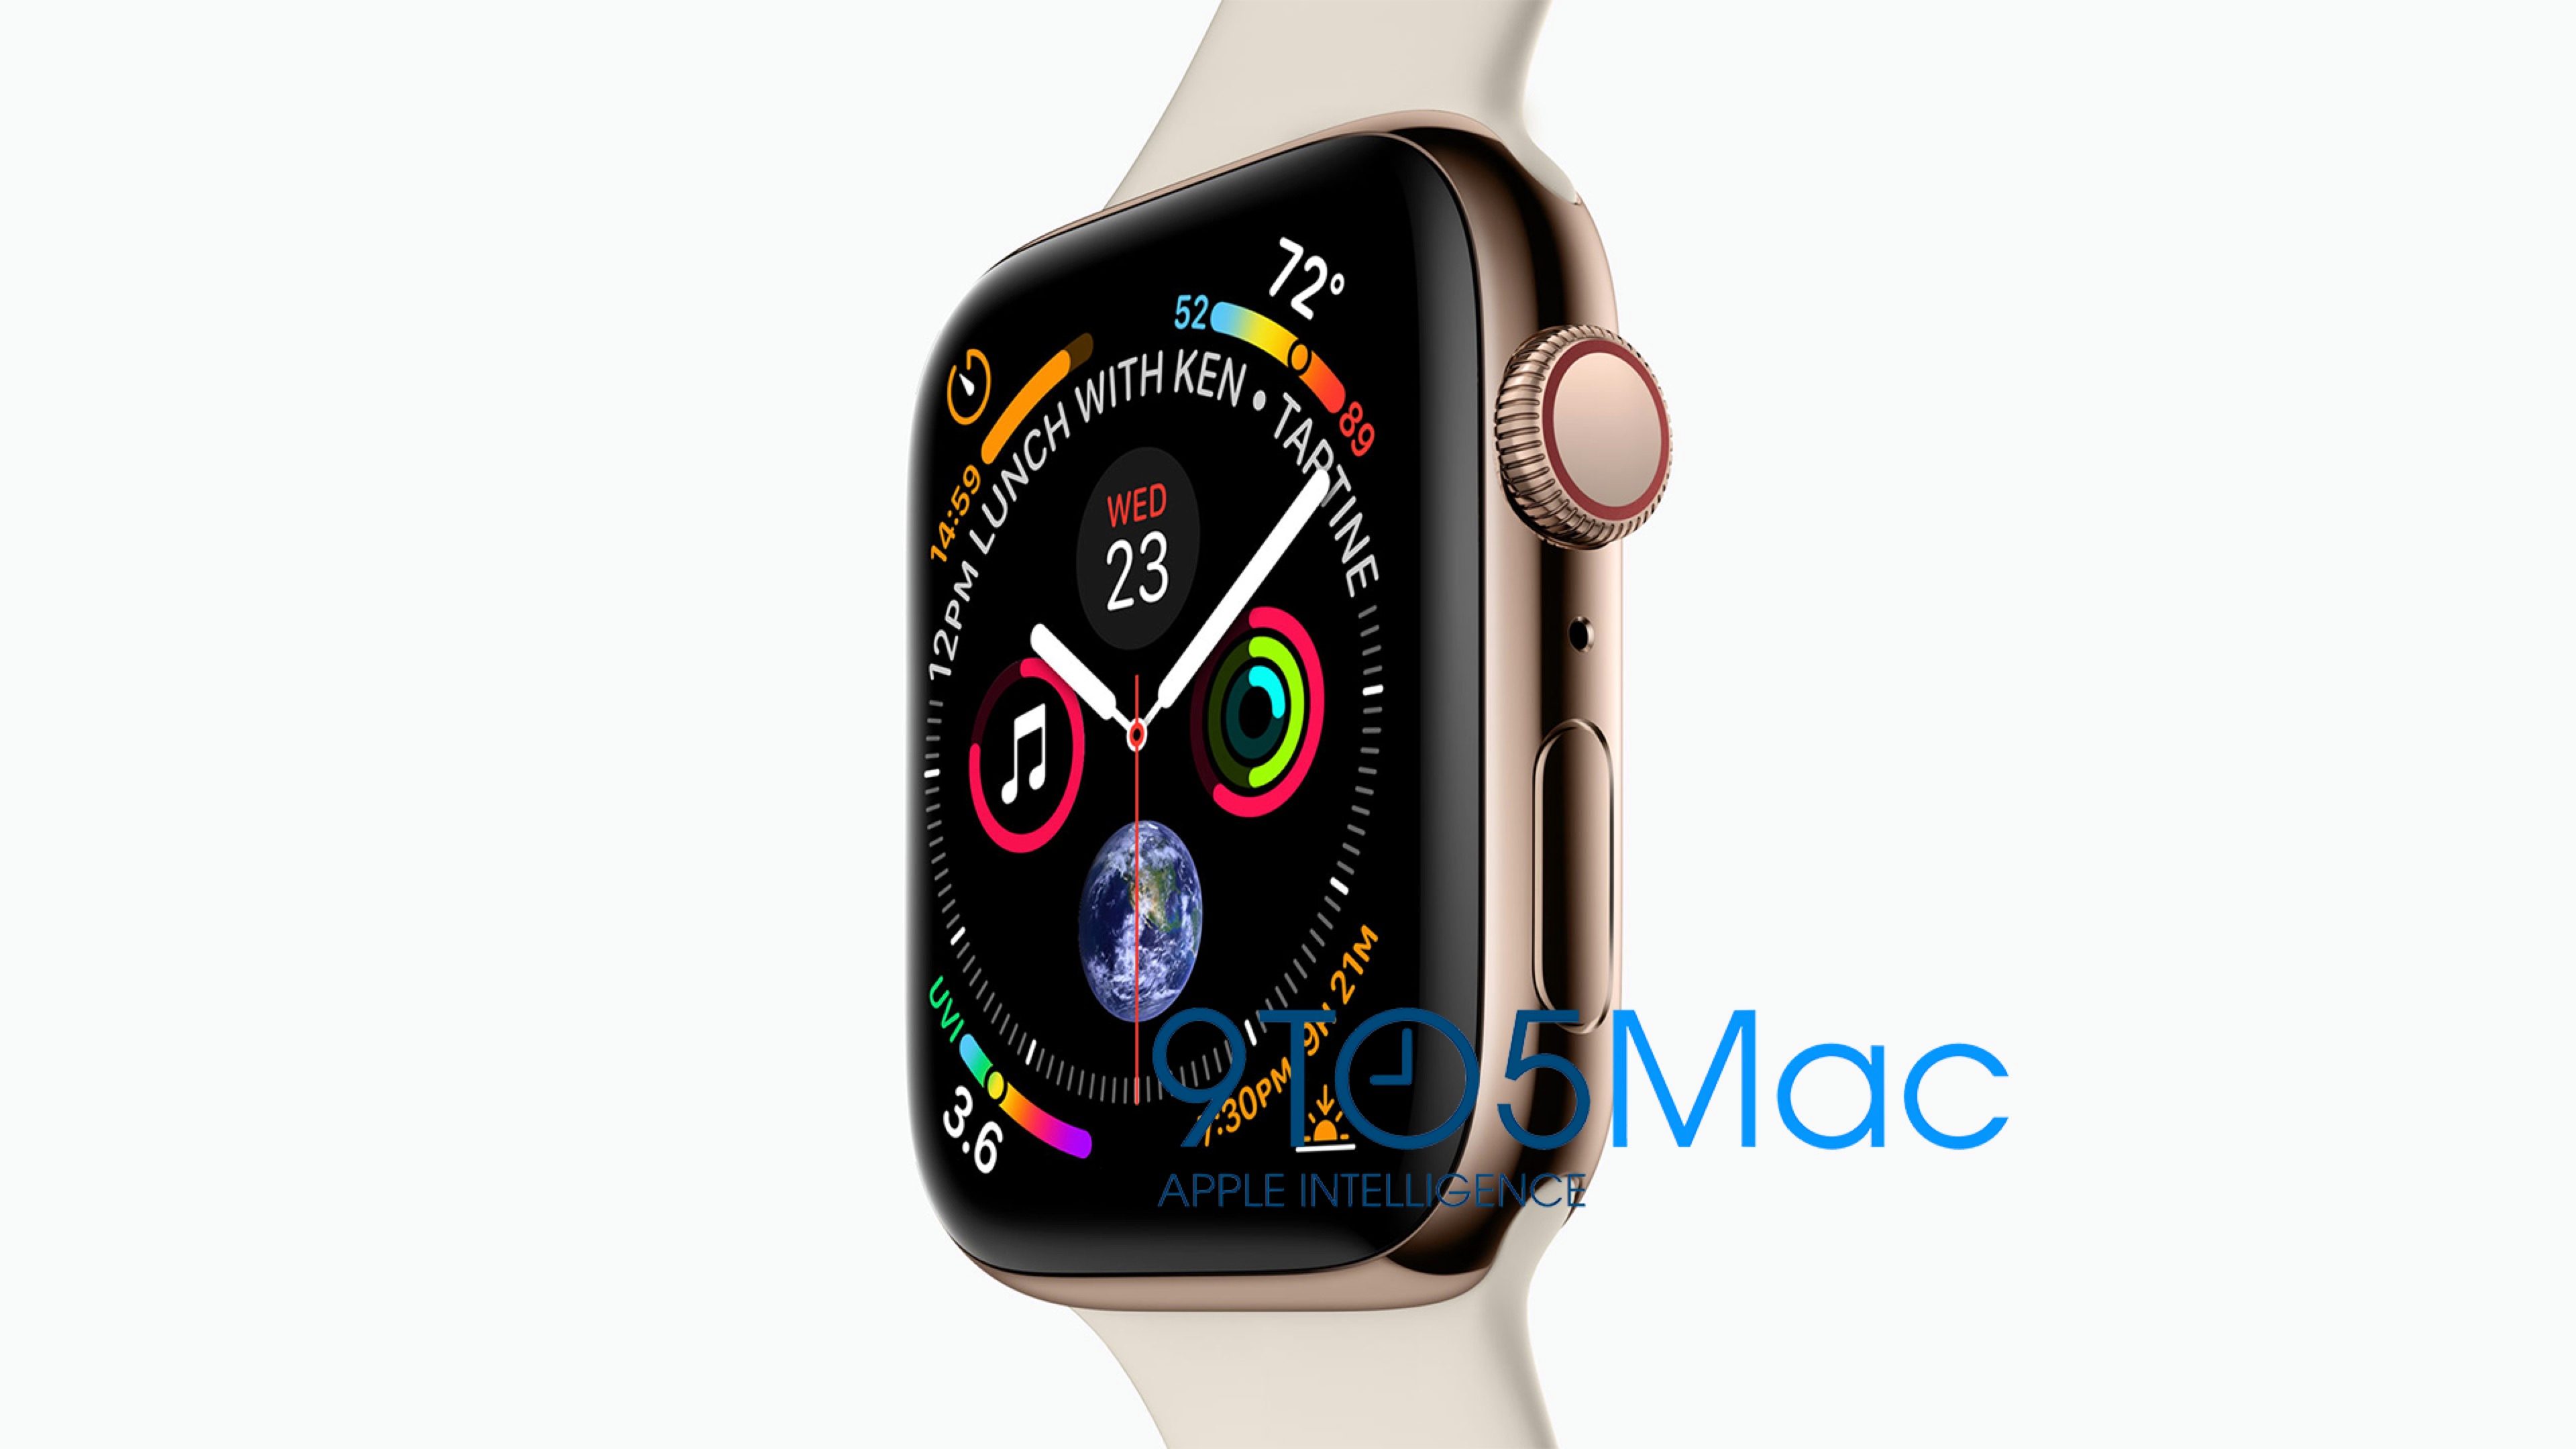 Apple Watch Series 4 Leak Reveals Larger Display and New Watch Face